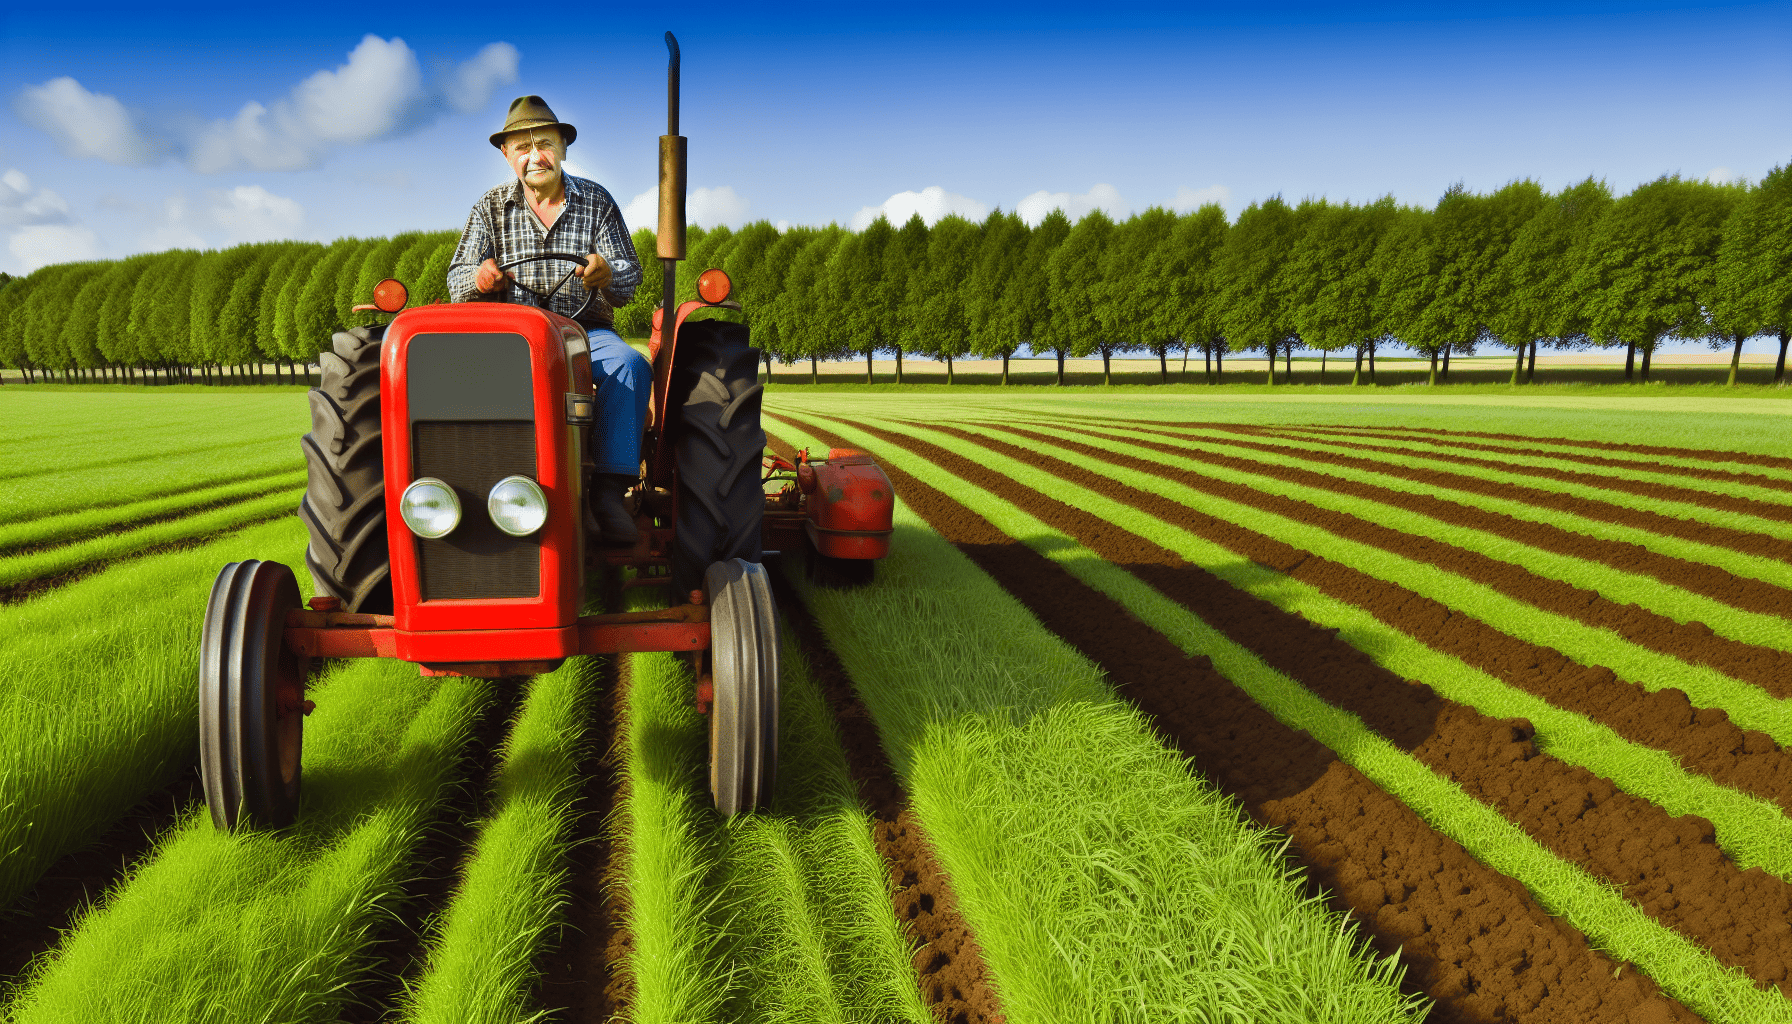 Maximizing tractor efficiency through proper care